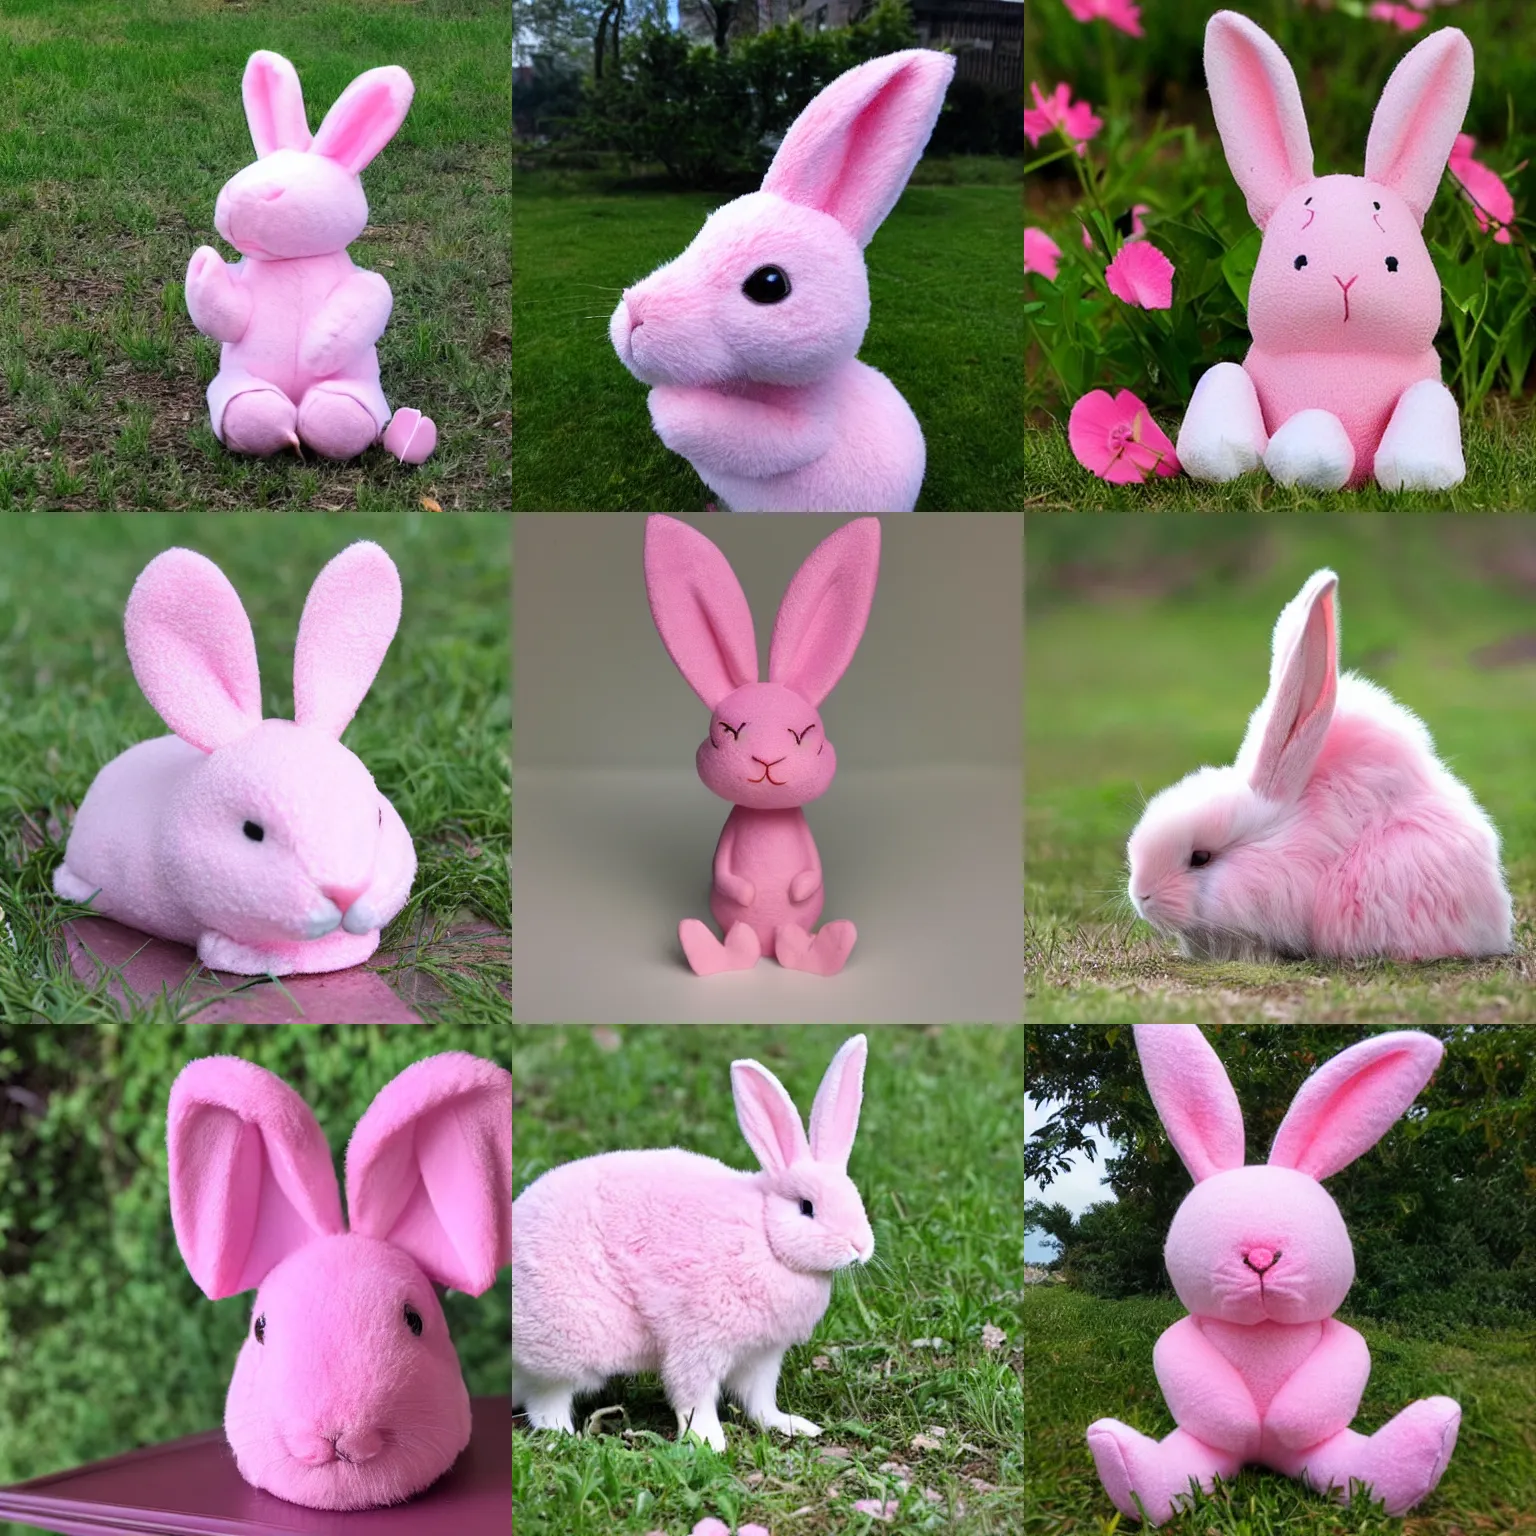 Prompt: a sweet pink rabbit with large ears